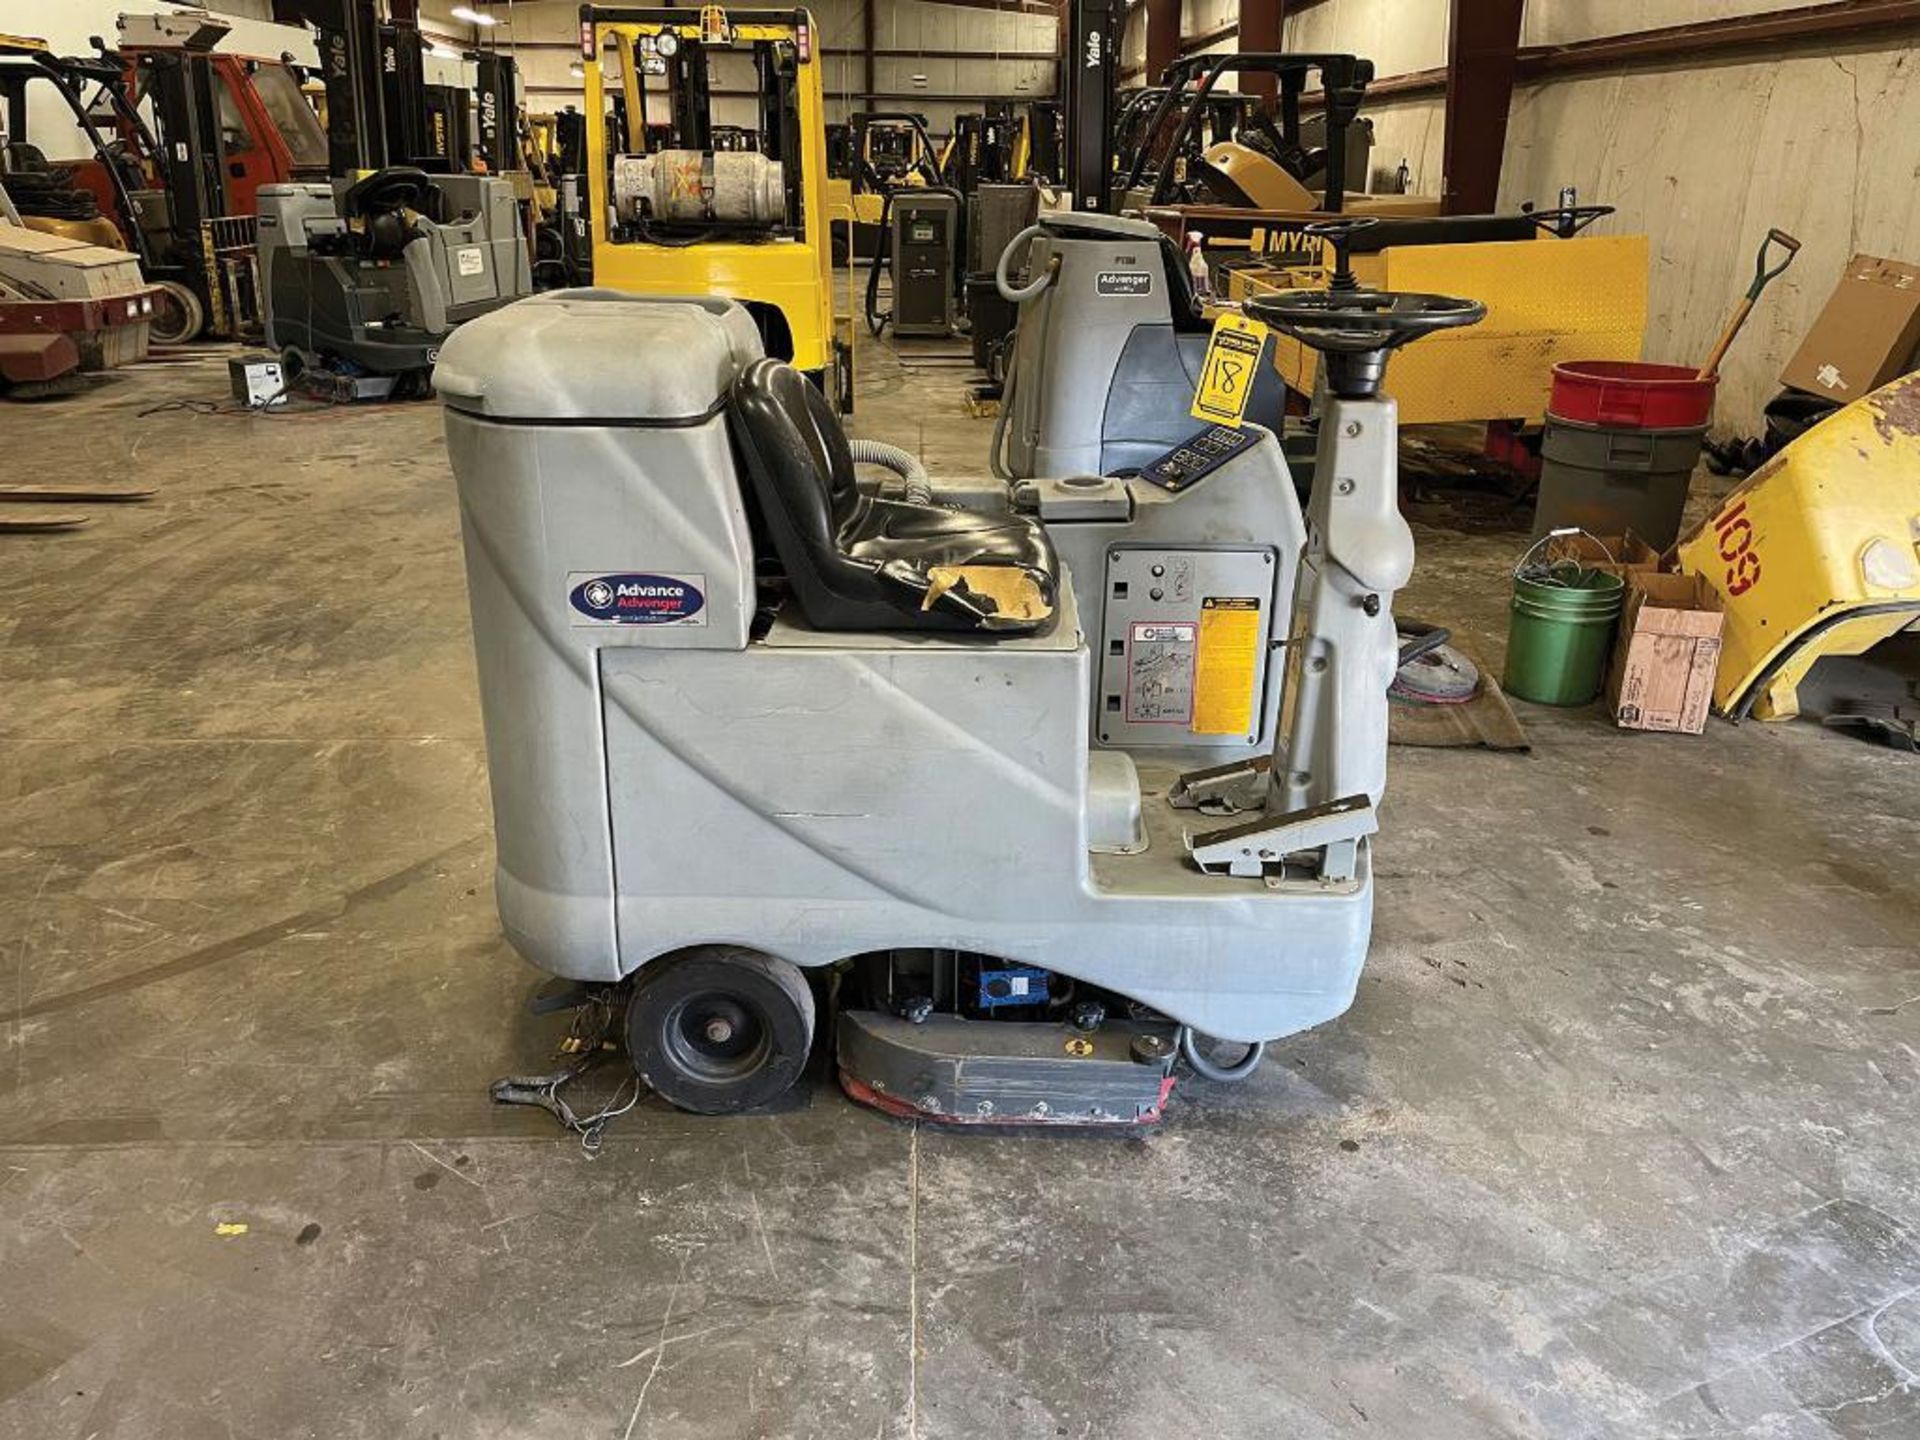 ADVANCE RIDE-ON FLOOR SCRUBBER, MODEL: ADVENGER 2600D, S/N: 1832010, 24-VOLT, WEIGHT: 1,385-LBS. - Image 3 of 5